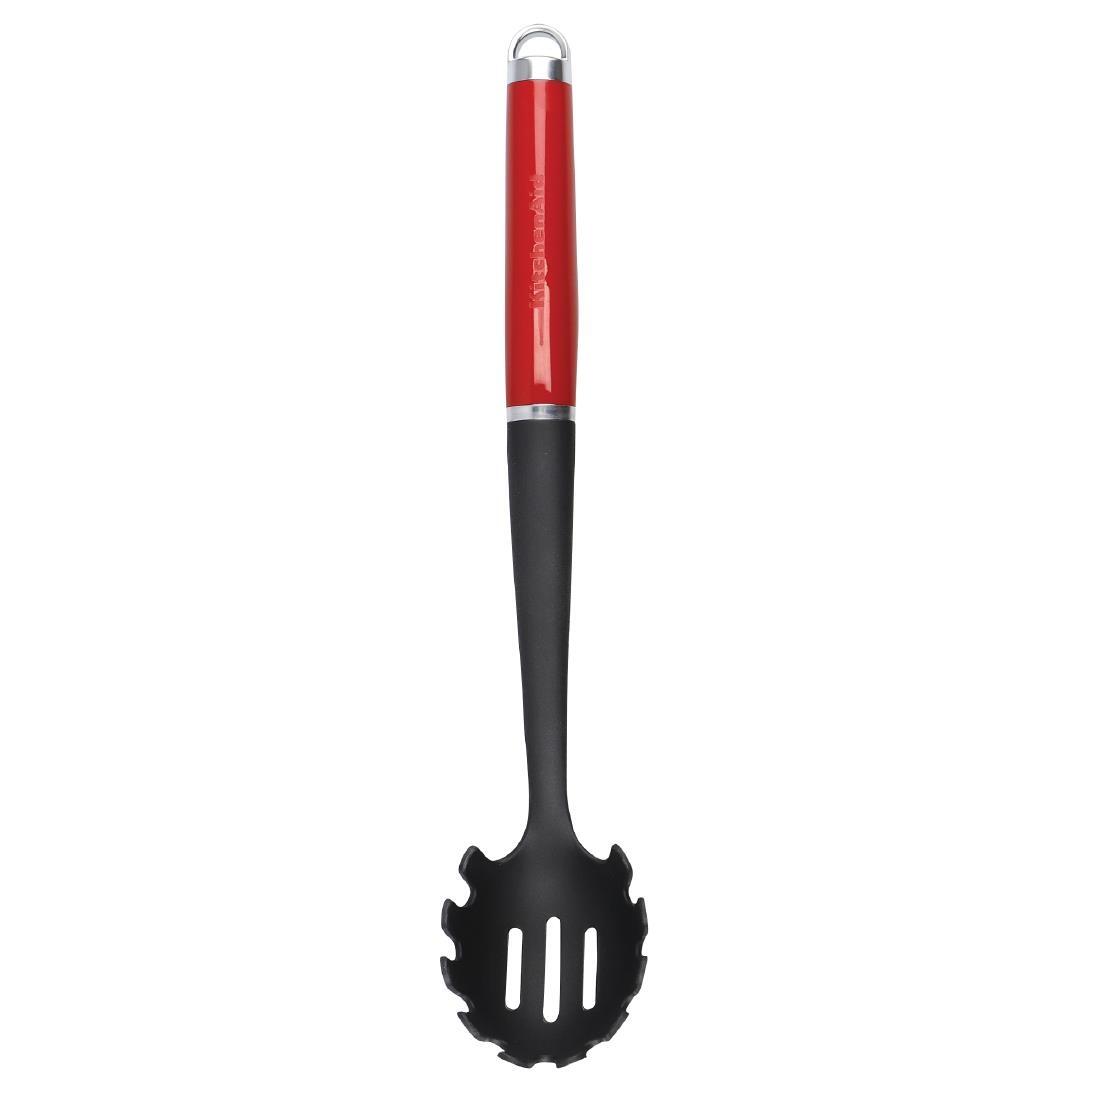 DX244 - KAG006OHERE - KitchenAid Core Ladle Empire Red - DX244